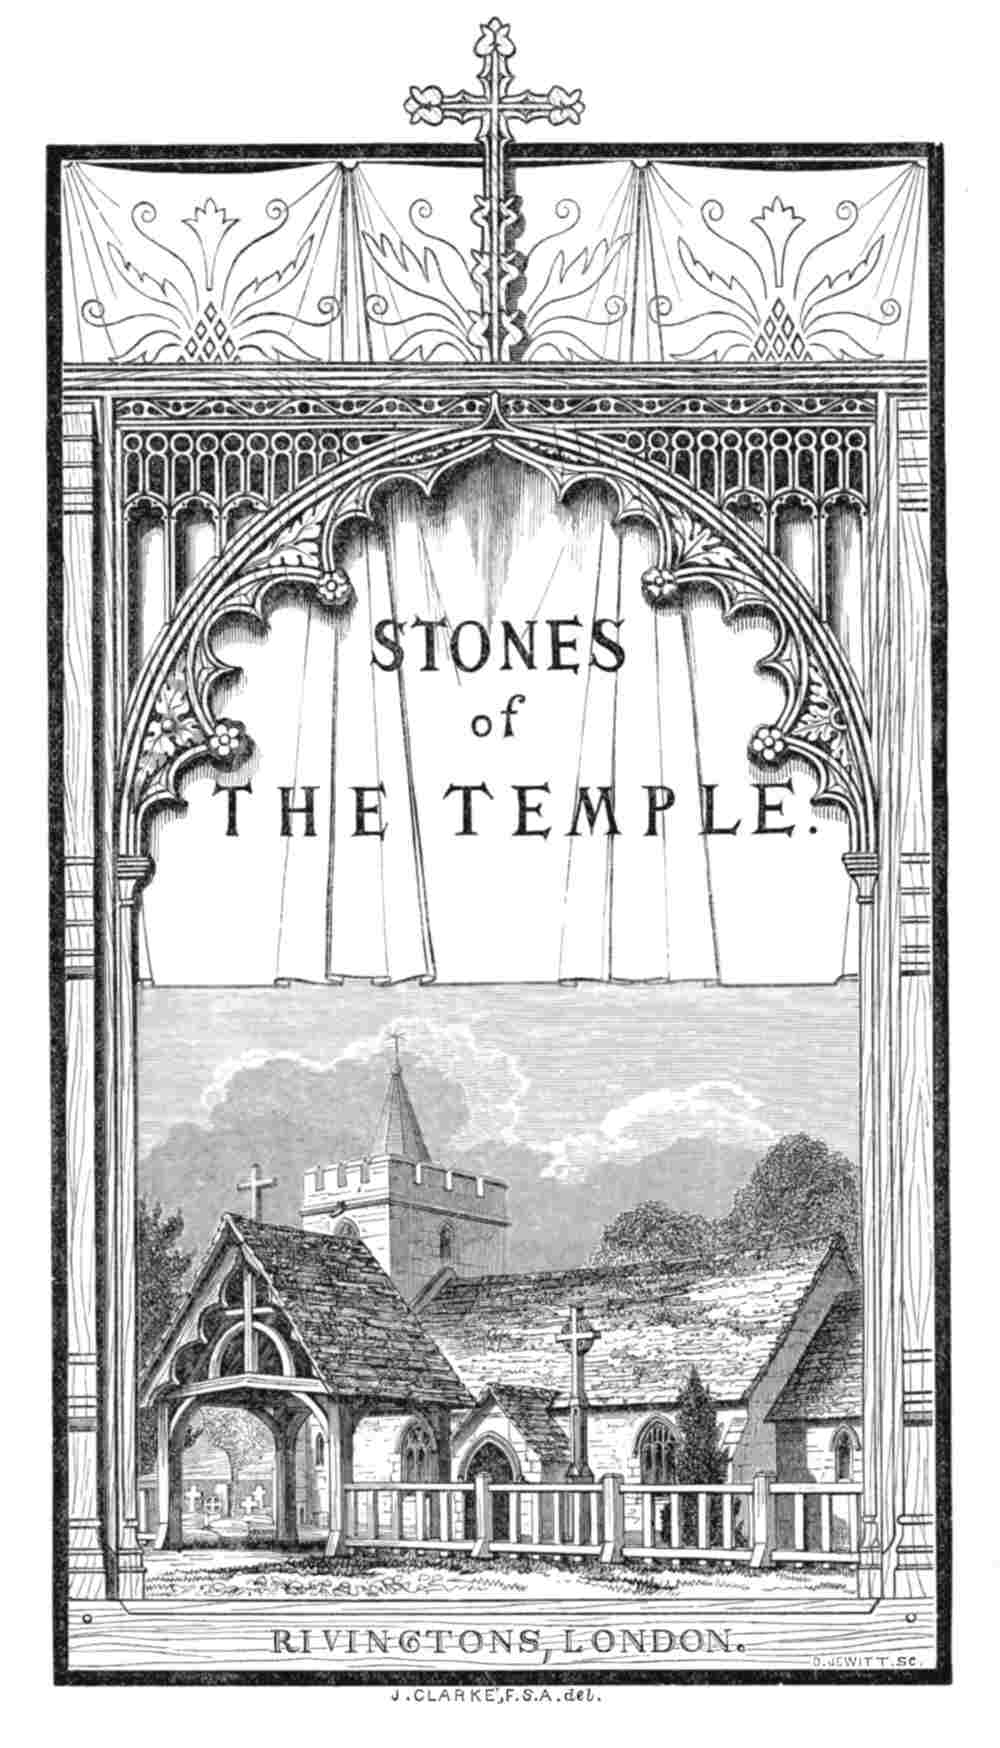 STONES OF THE TEMPLE